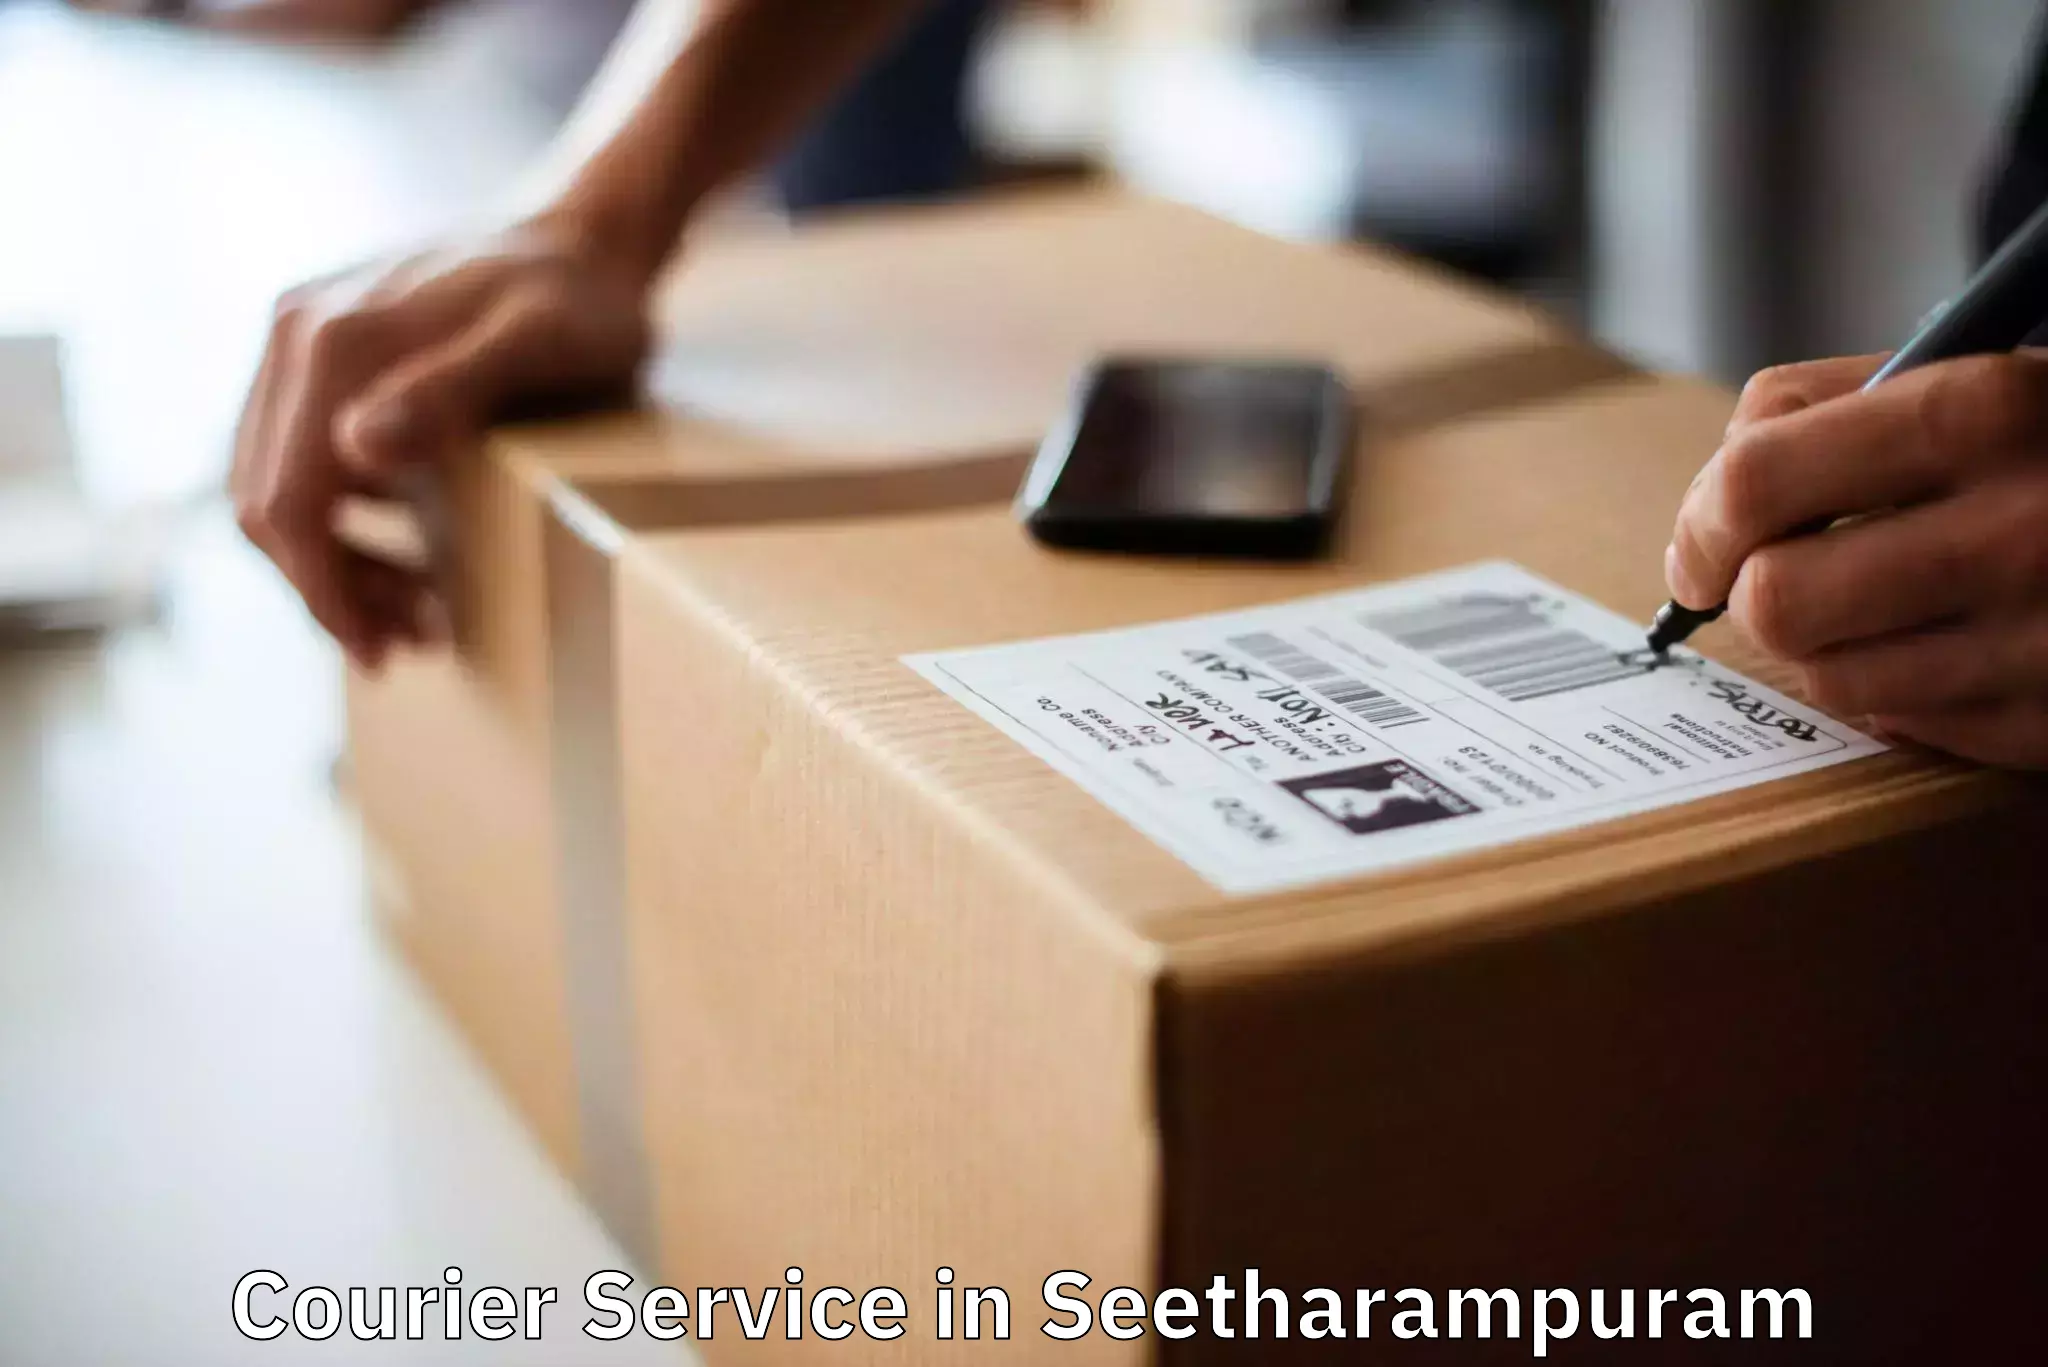 Remote area delivery in Seetharampuram